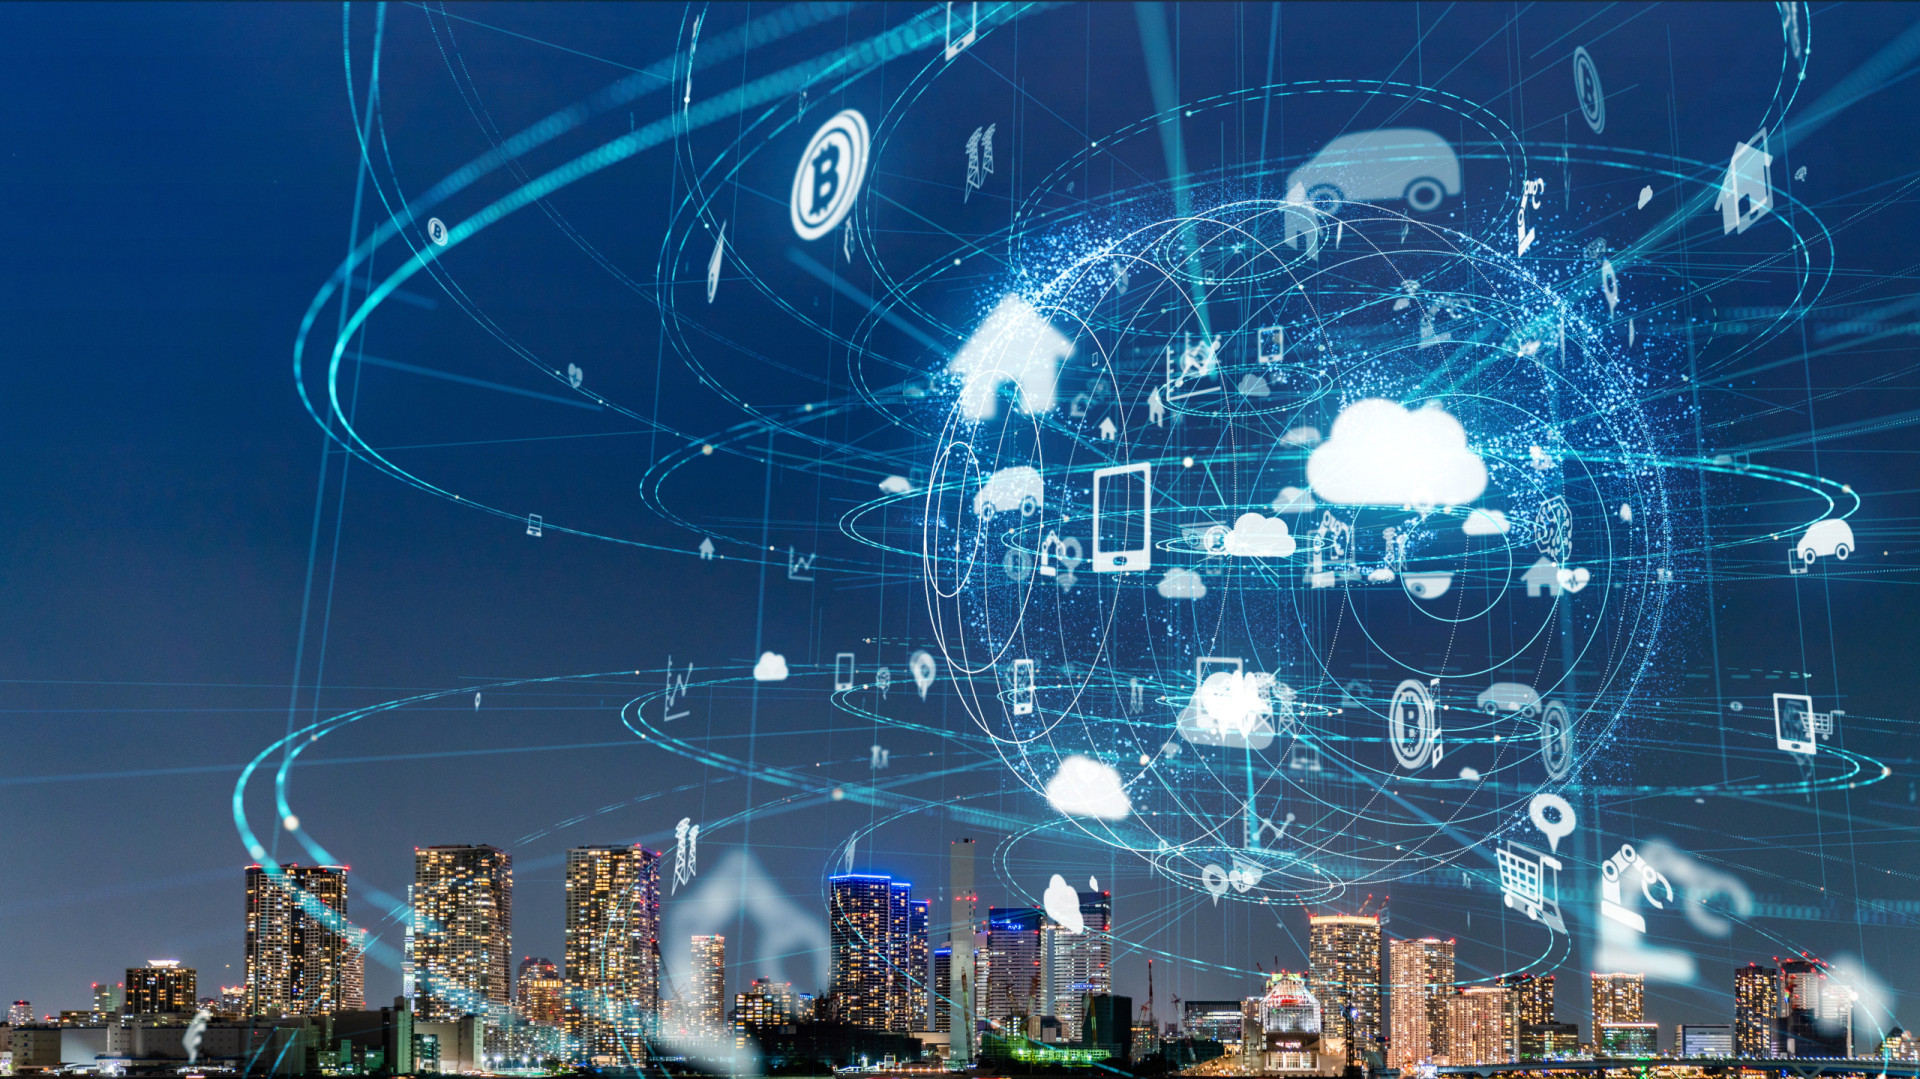 <p>IoT connects everyday devices to the internet, enabling them to send and receive data. It creates a network of interconnected devices, fostering automation, data exchange, and enhanced efficiency in various domains.</p><p>You may also like:<a href="https://www.starsinsider.com/n/237991?utm_source=msn.com&utm_medium=display&utm_campaign=referral_description&utm_content=635781en-en"> Celebs who have voiced animated characters</a></p>